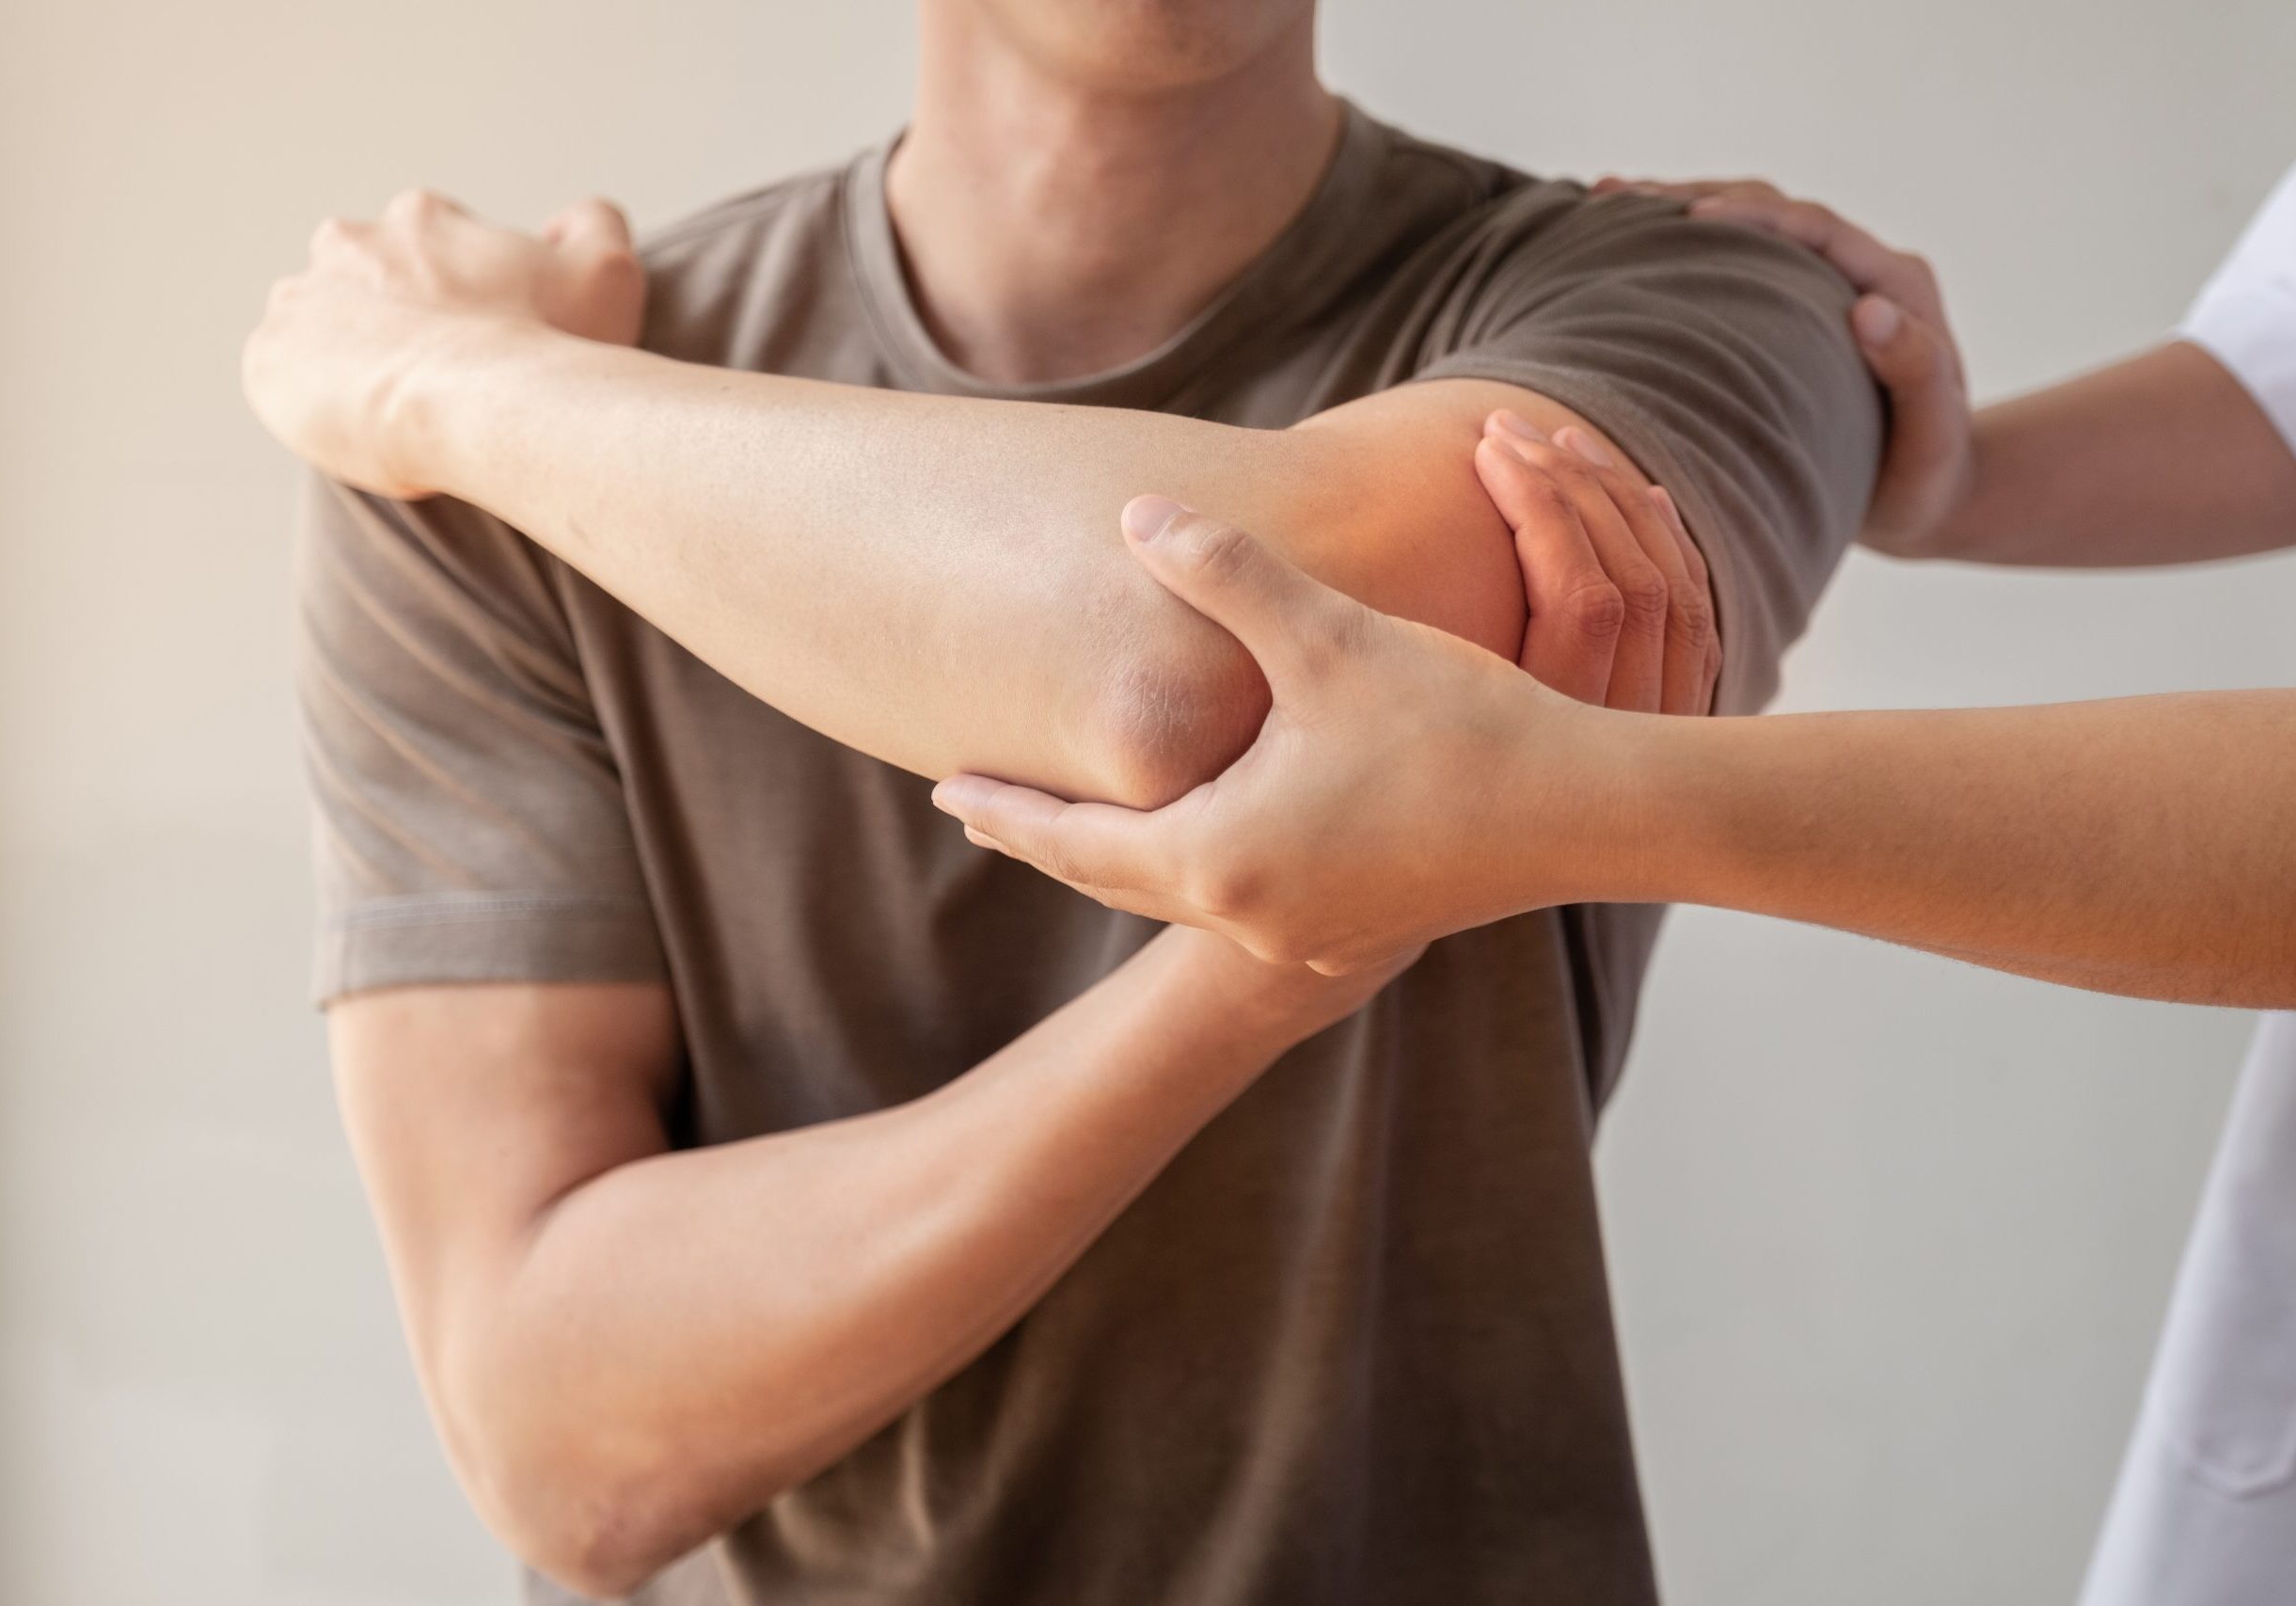 Female physiotherapists provide assistance to male patients with elbow injuries examine patients in rehabilitation centers. Physiotherapy concepts.